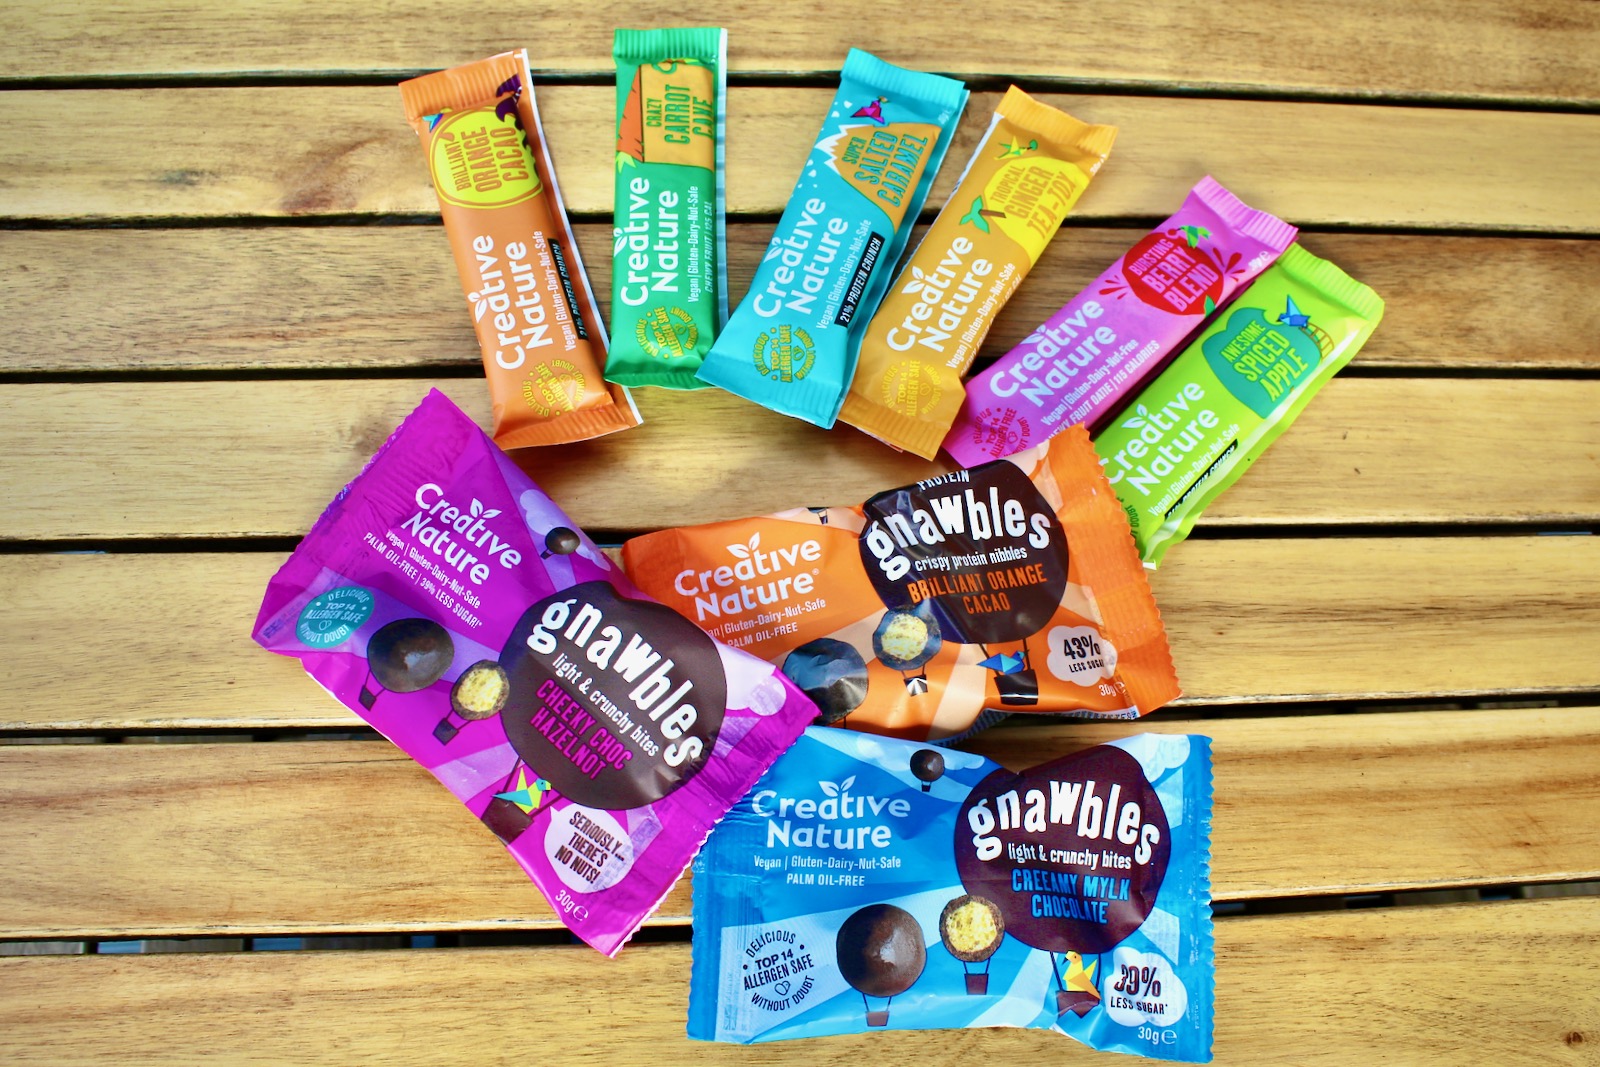 Nutrition Review – Creative Nature Energy Bars and Snacks